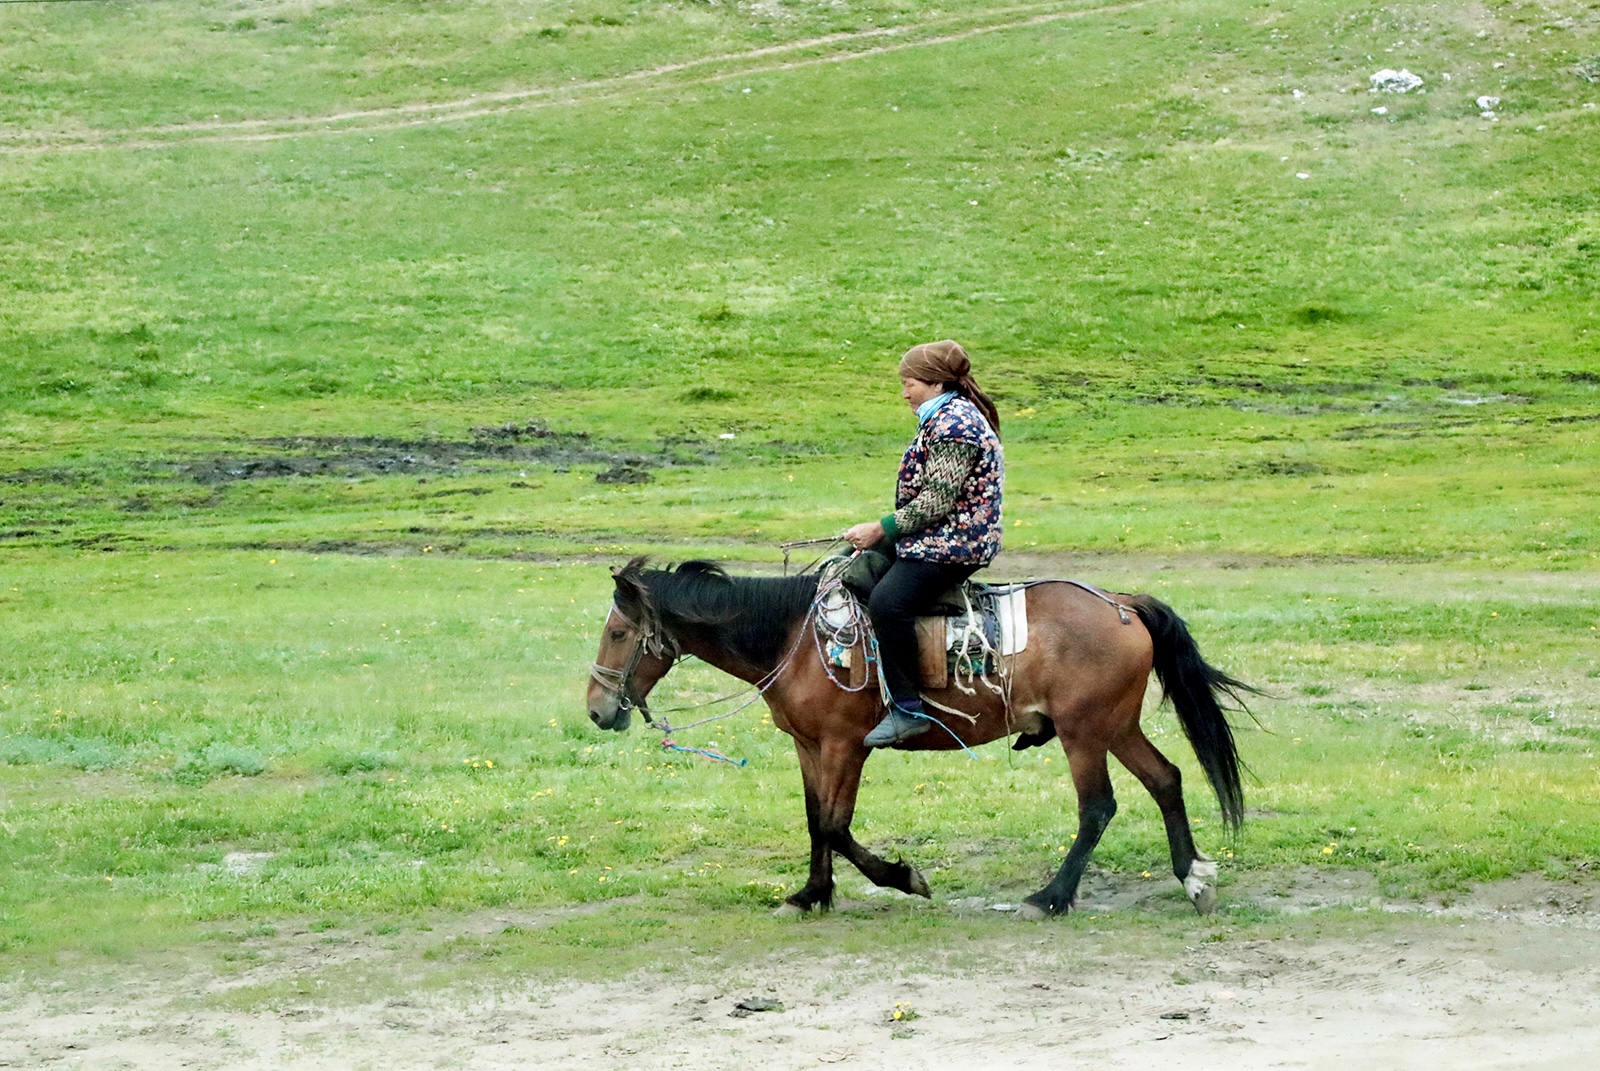 A herder rides a horse in Burqin County, Altay, Xinjiang. /CGTN